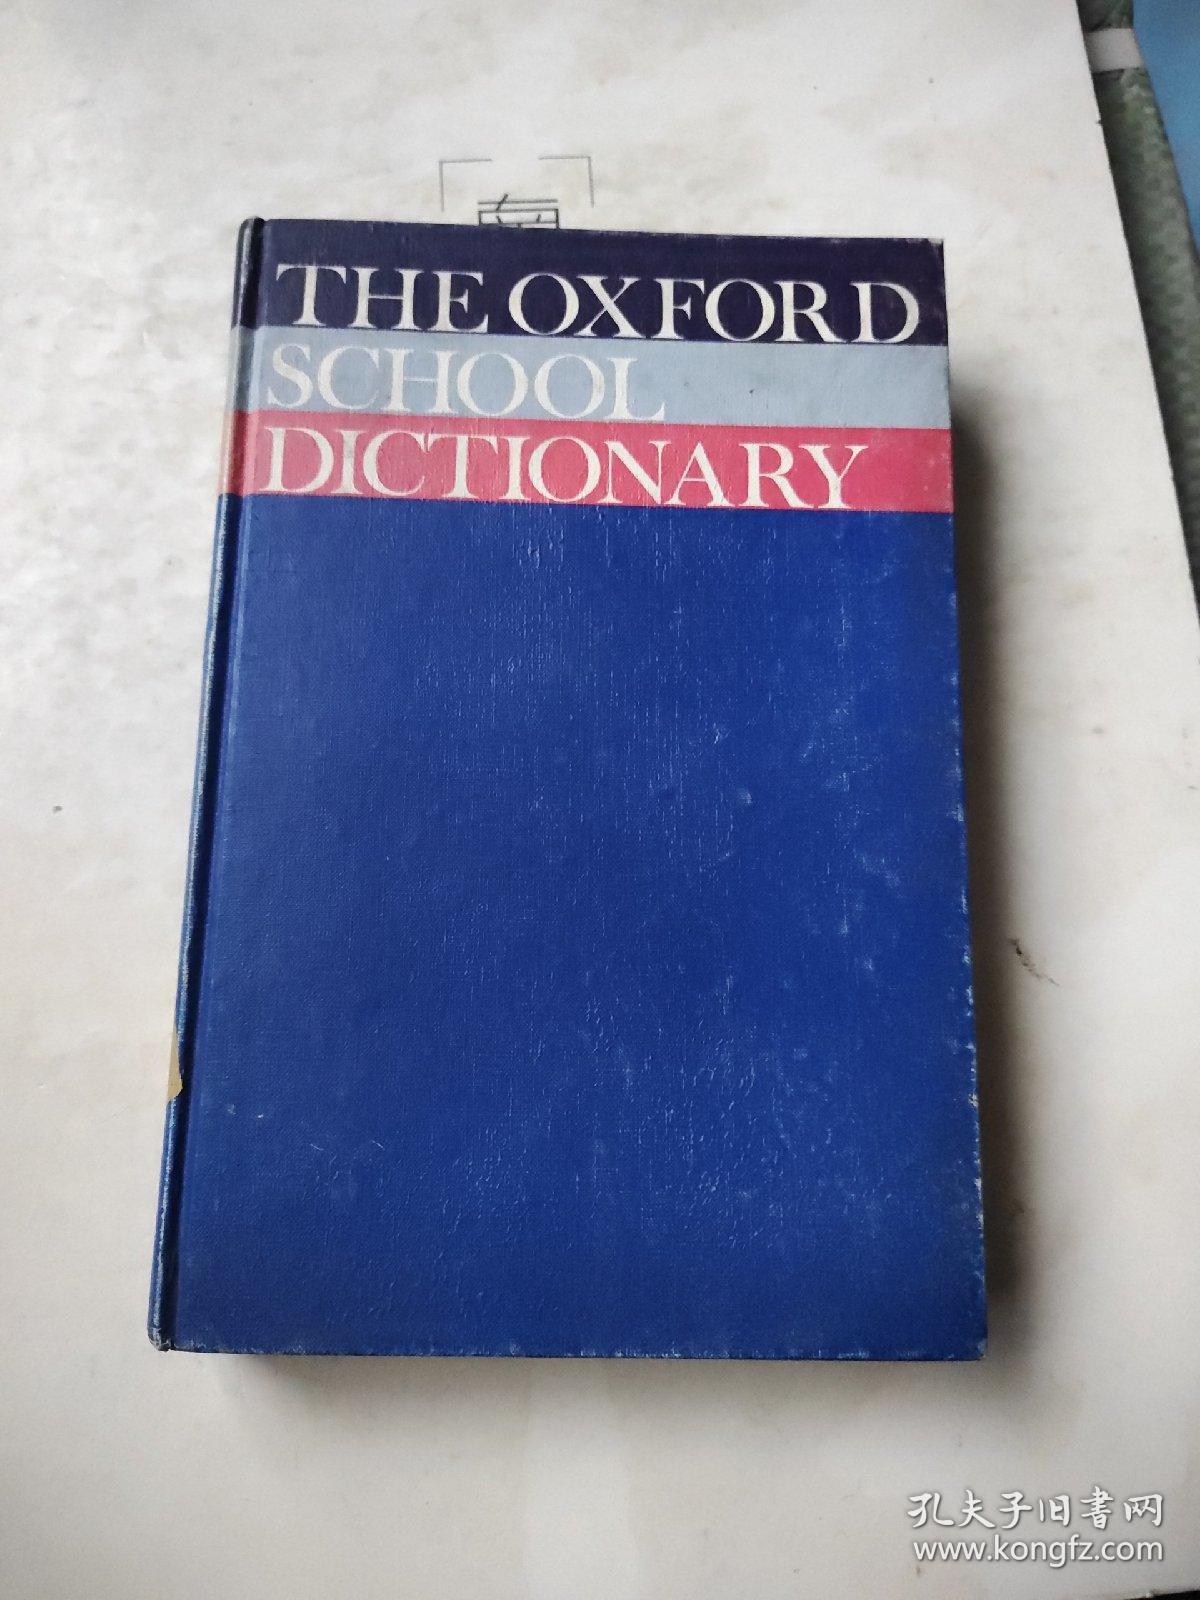 THE OXFORD SCHOOL DICTIONARY